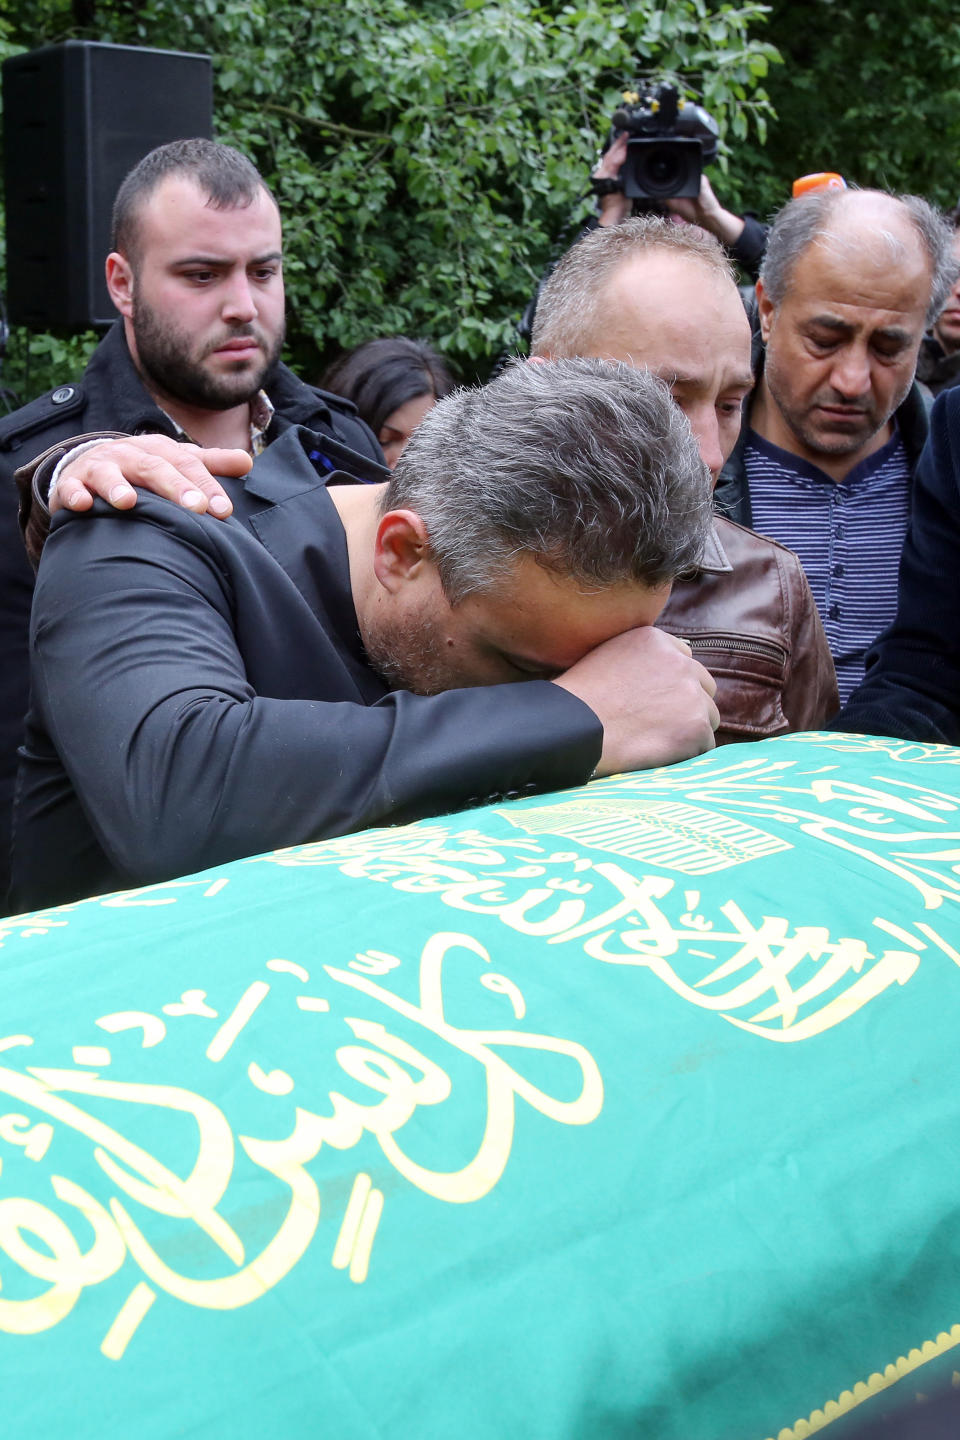 Celal Dede, front, mourns at the coffin of his son Diren during a funeral service in Hamburg, Germany, Sunday, May 4, 2014. More than 500 people were attending a memorial service for the 17-year-old German exchange student who was shot dead a week ago in the United States. (AP Photo/dpa, Bodo Marks)